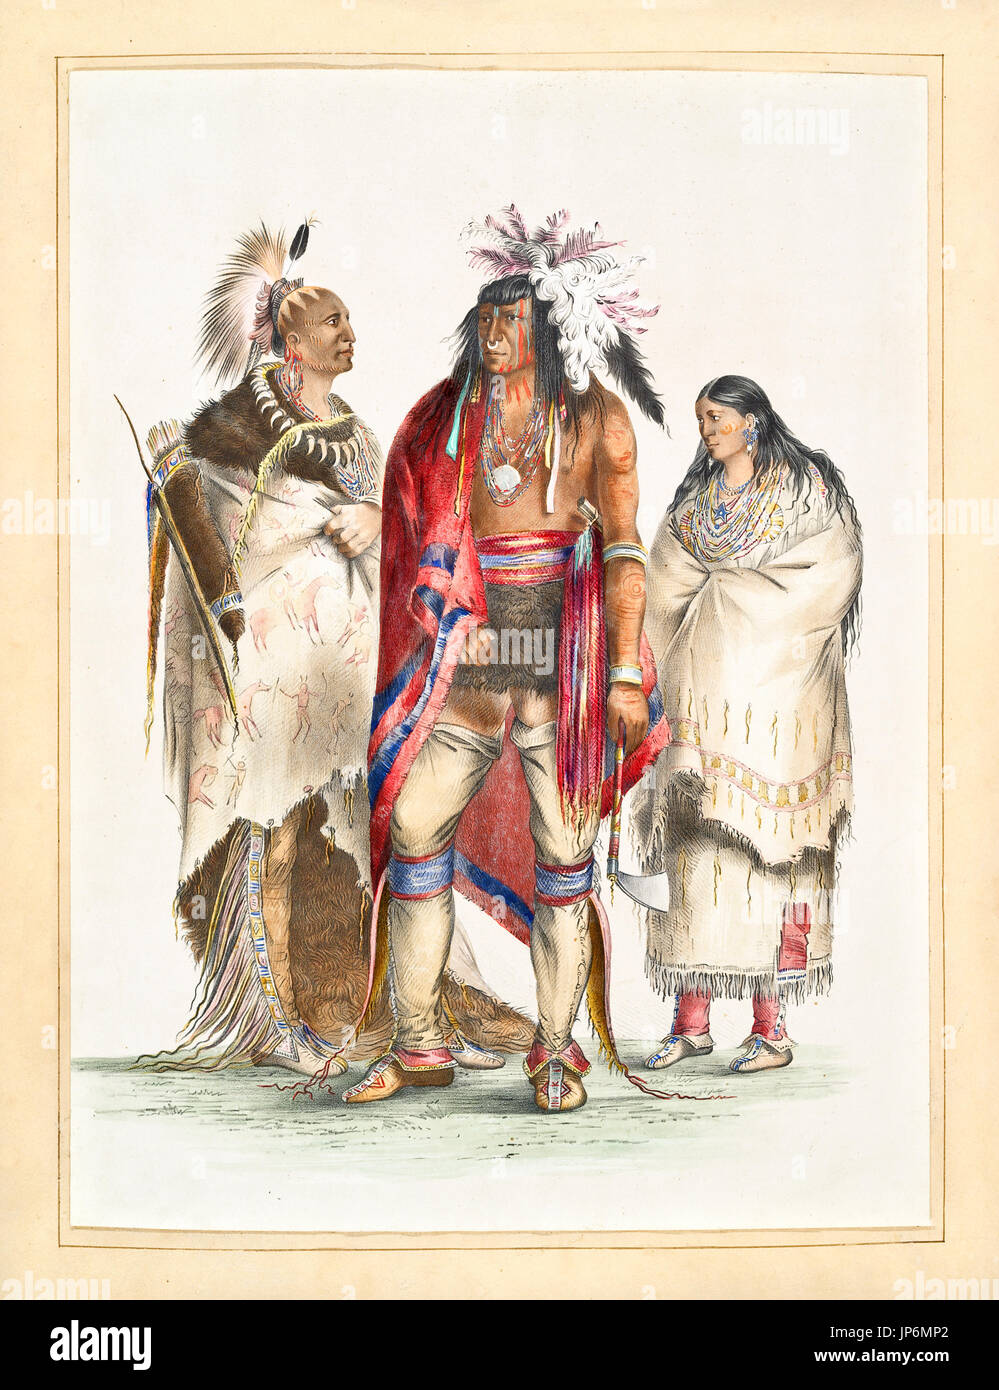 North American Indians. By G. Catlin, publ. on Catlin's North American Indian Portfolio..., Ackerman, New York, 1845 Stock Photo